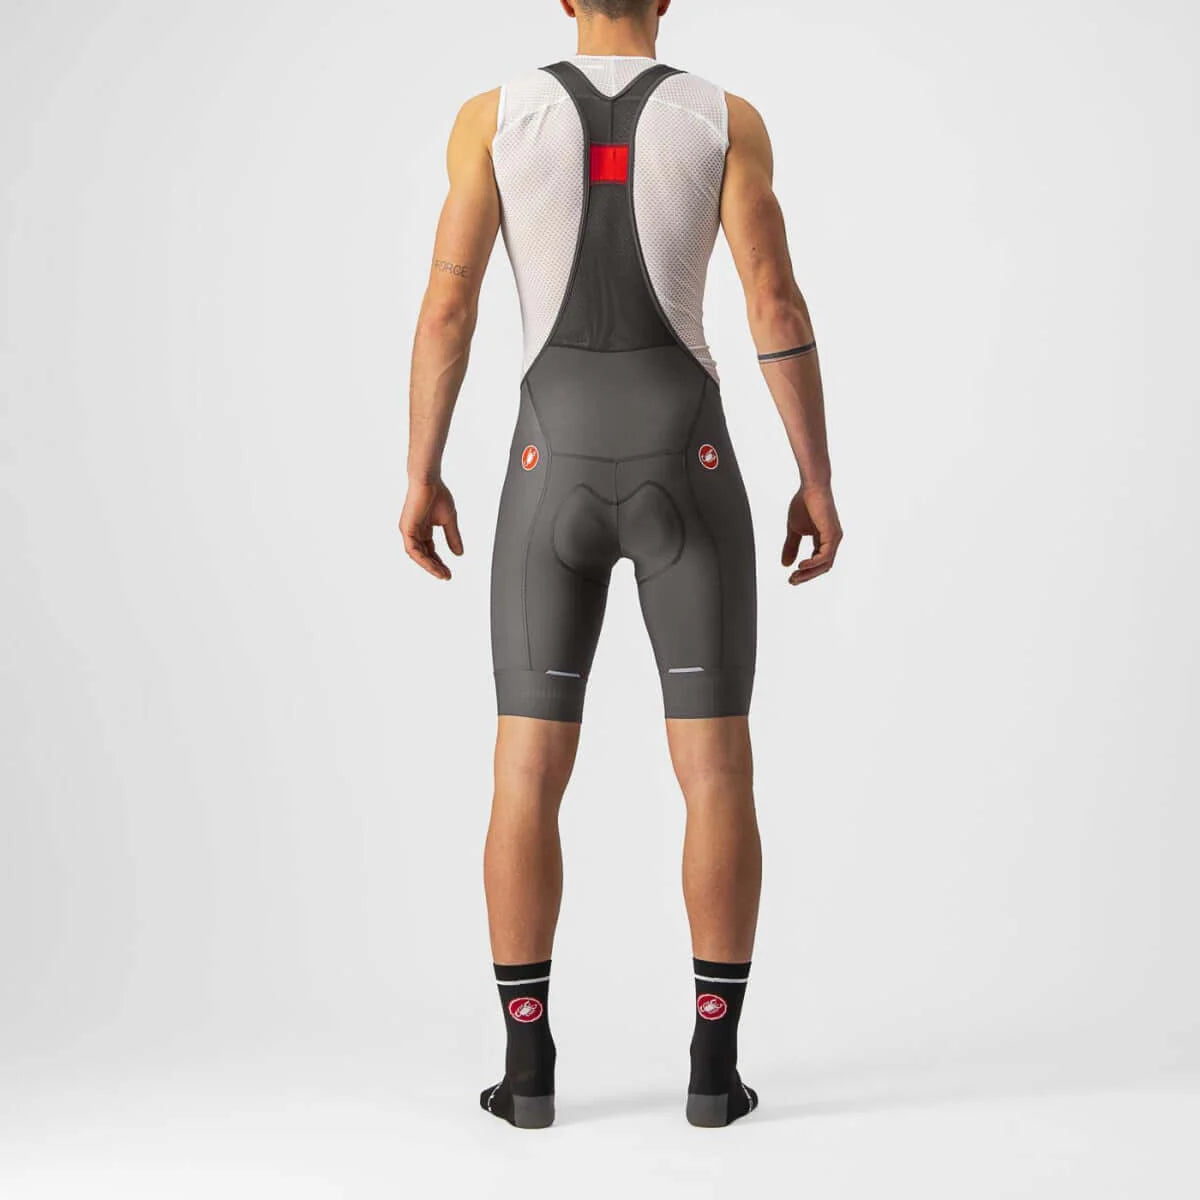 CASTELLI COMPETIZIONE MENS CYCLING BIBSHORTS (FOREST GRAY)